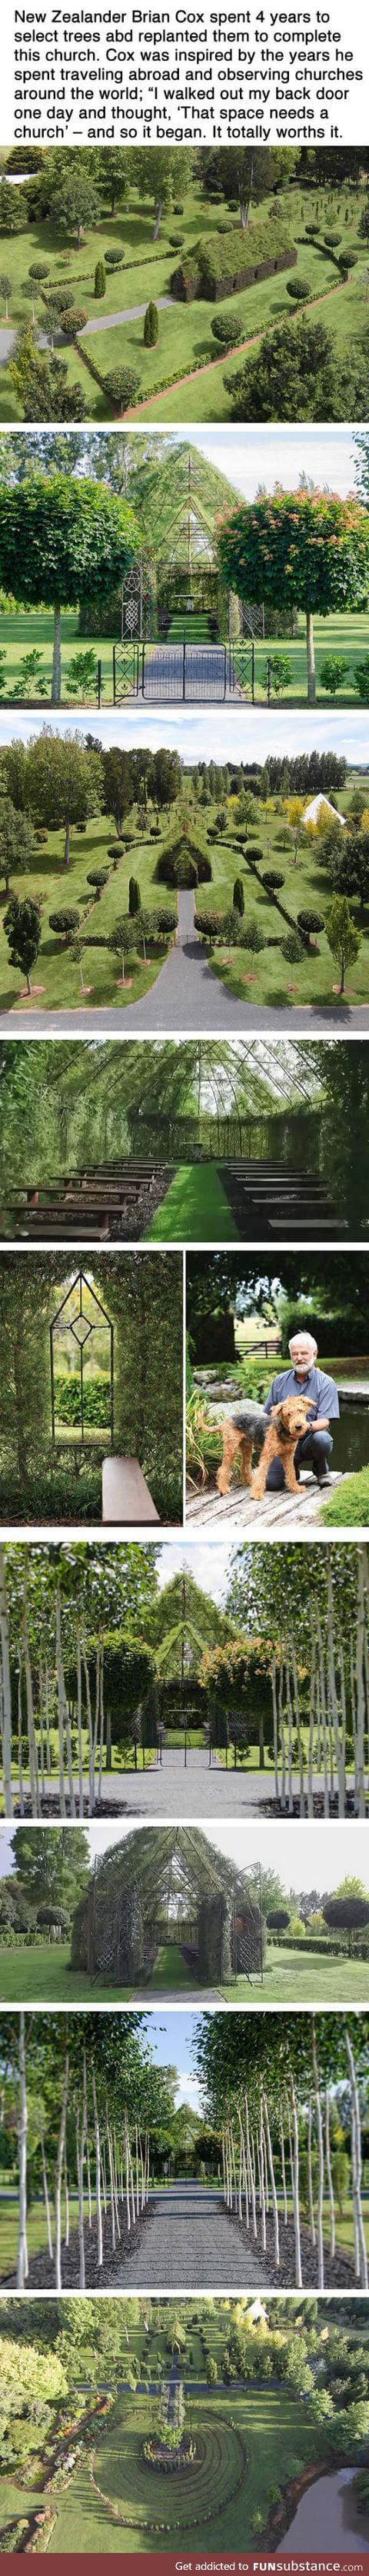 This Man Spent Four Years Using Trees To Grow A Church